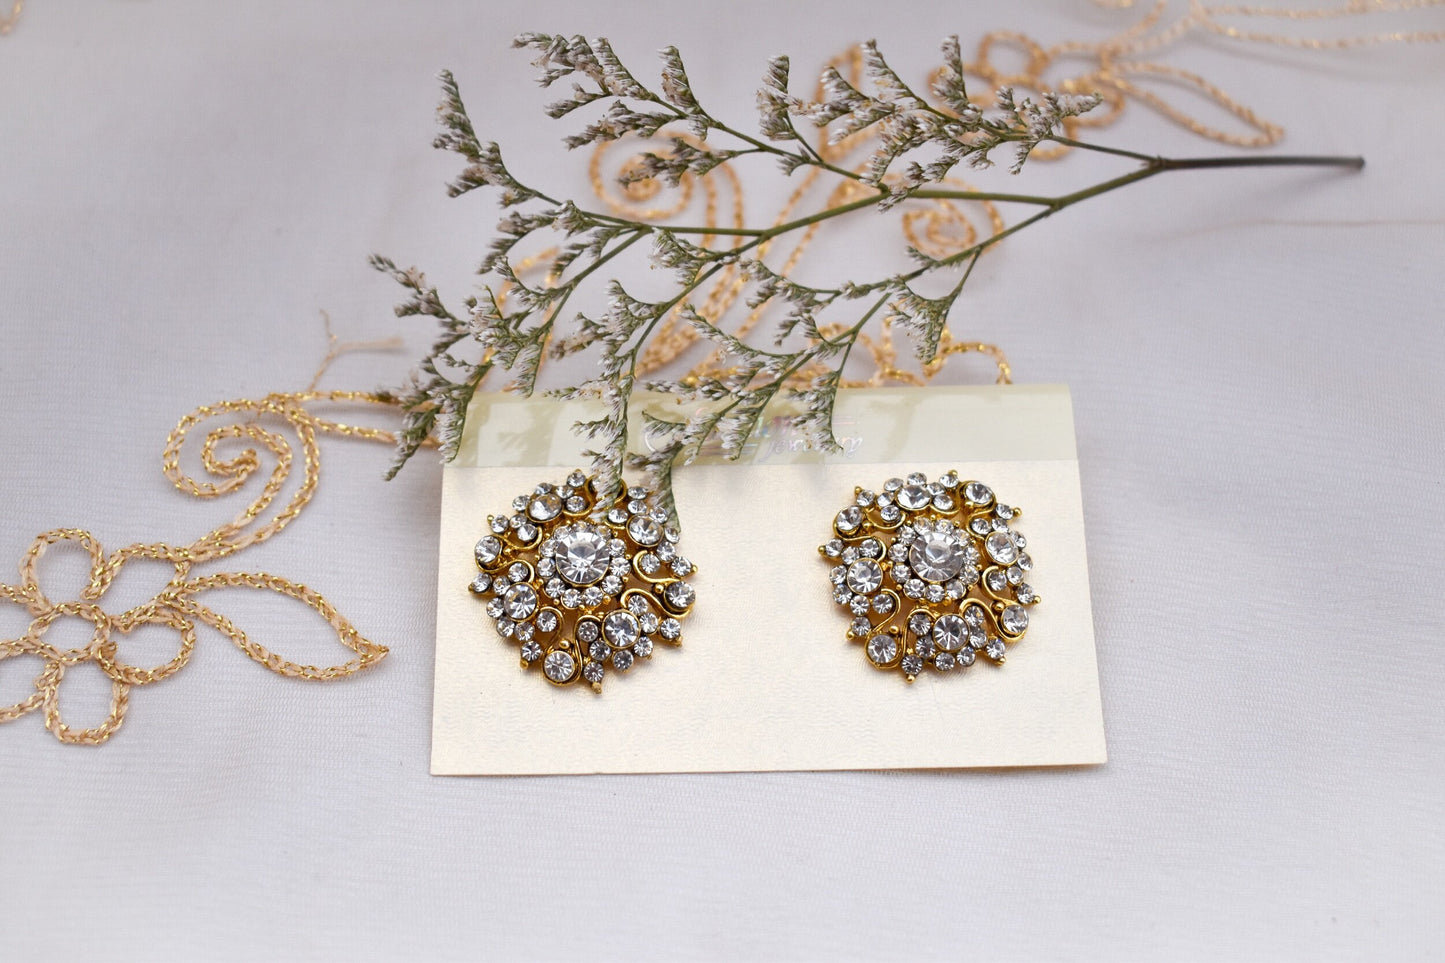 ‘Bloom’ Silver and Gold Stud Earrings